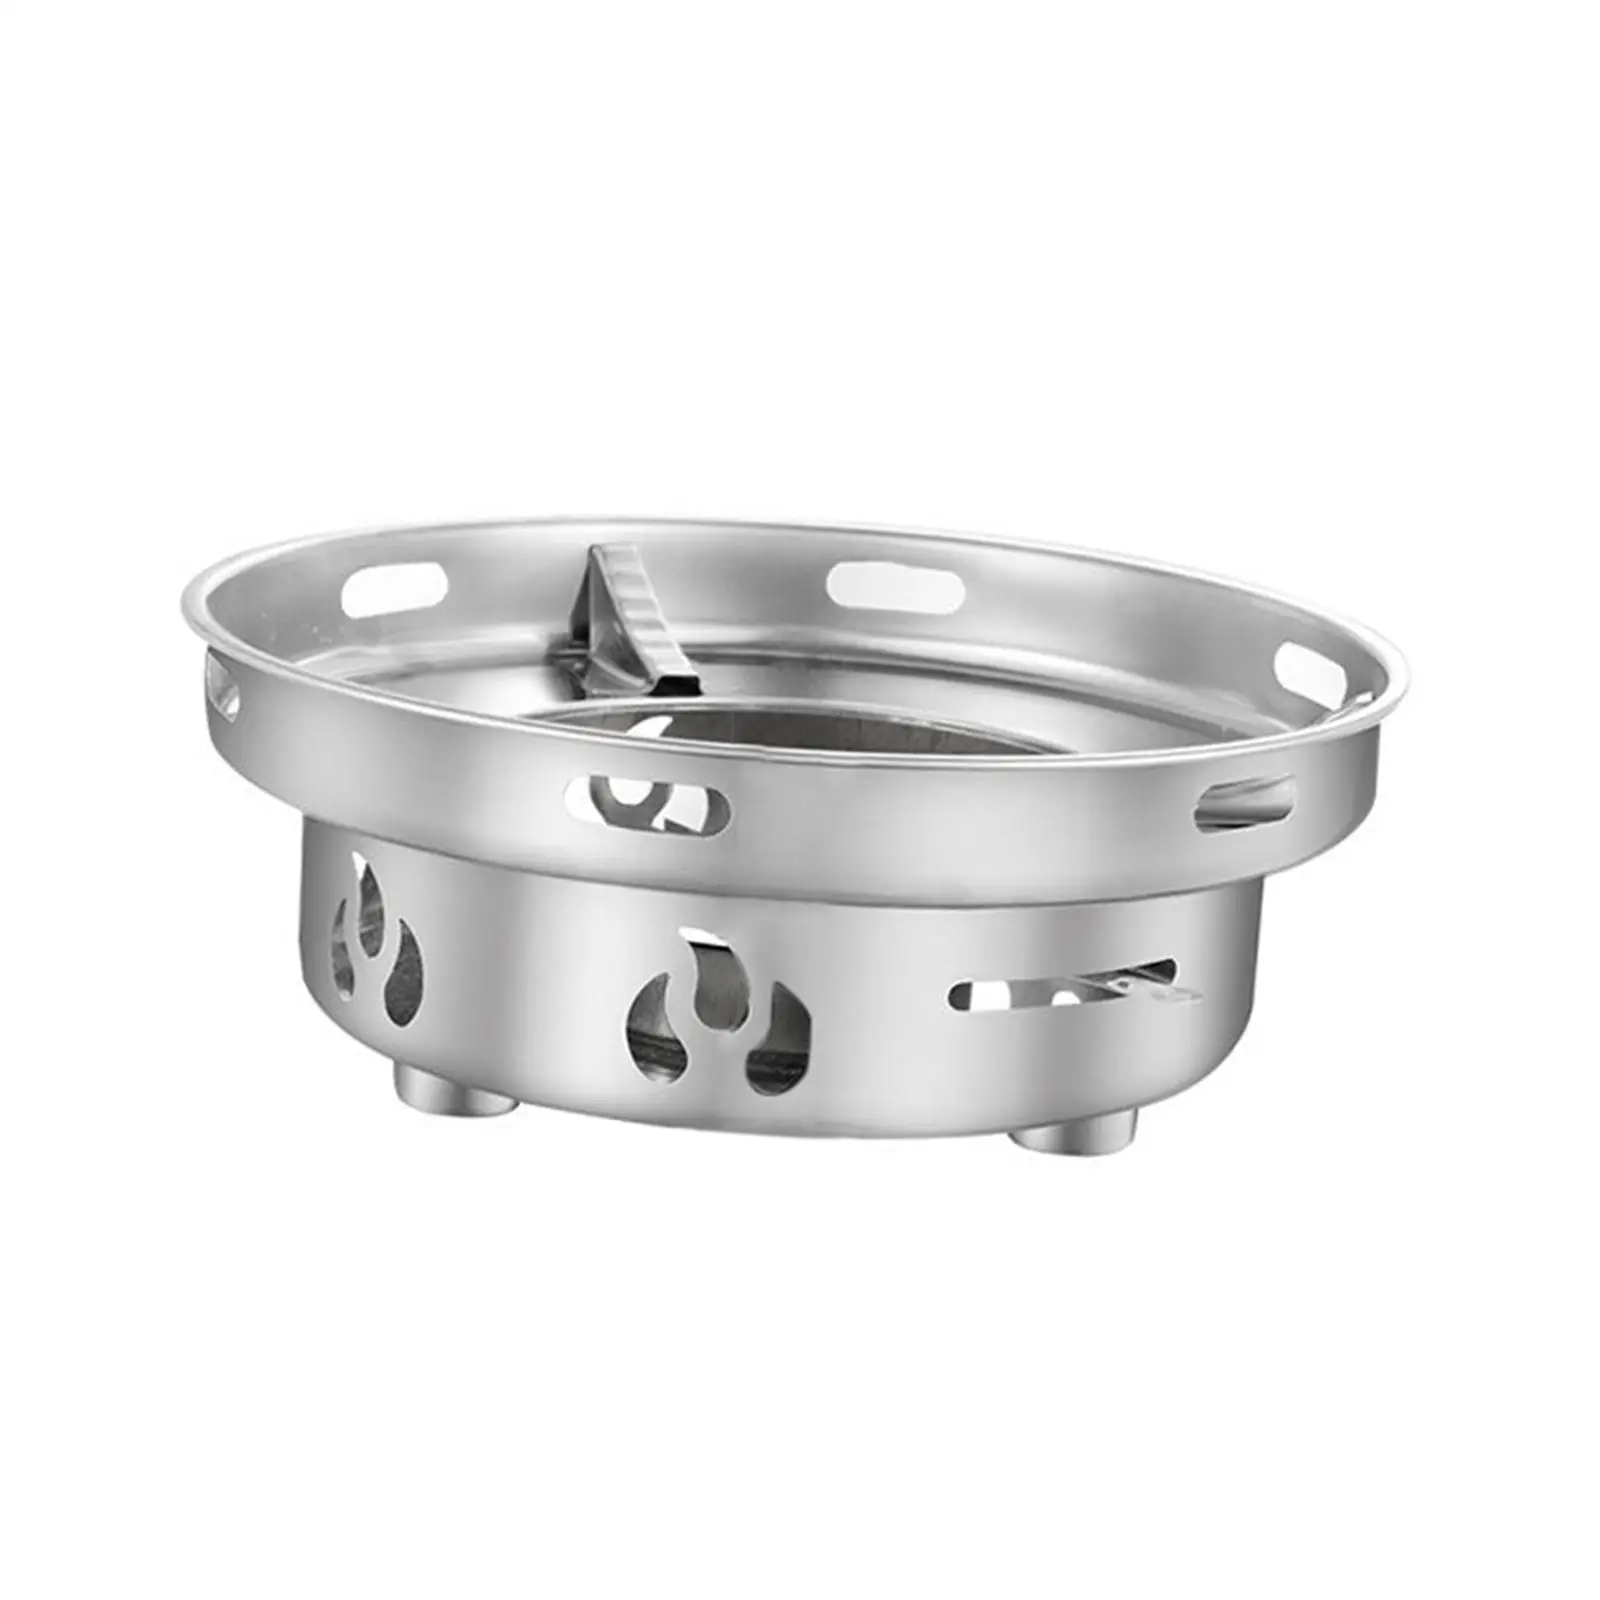 Alcohol Stove Camp Stove Alcohol Burner Stove Stand Compact Solid Fuel Stove Cookware for Hiking Cooker Backpacking Picnic